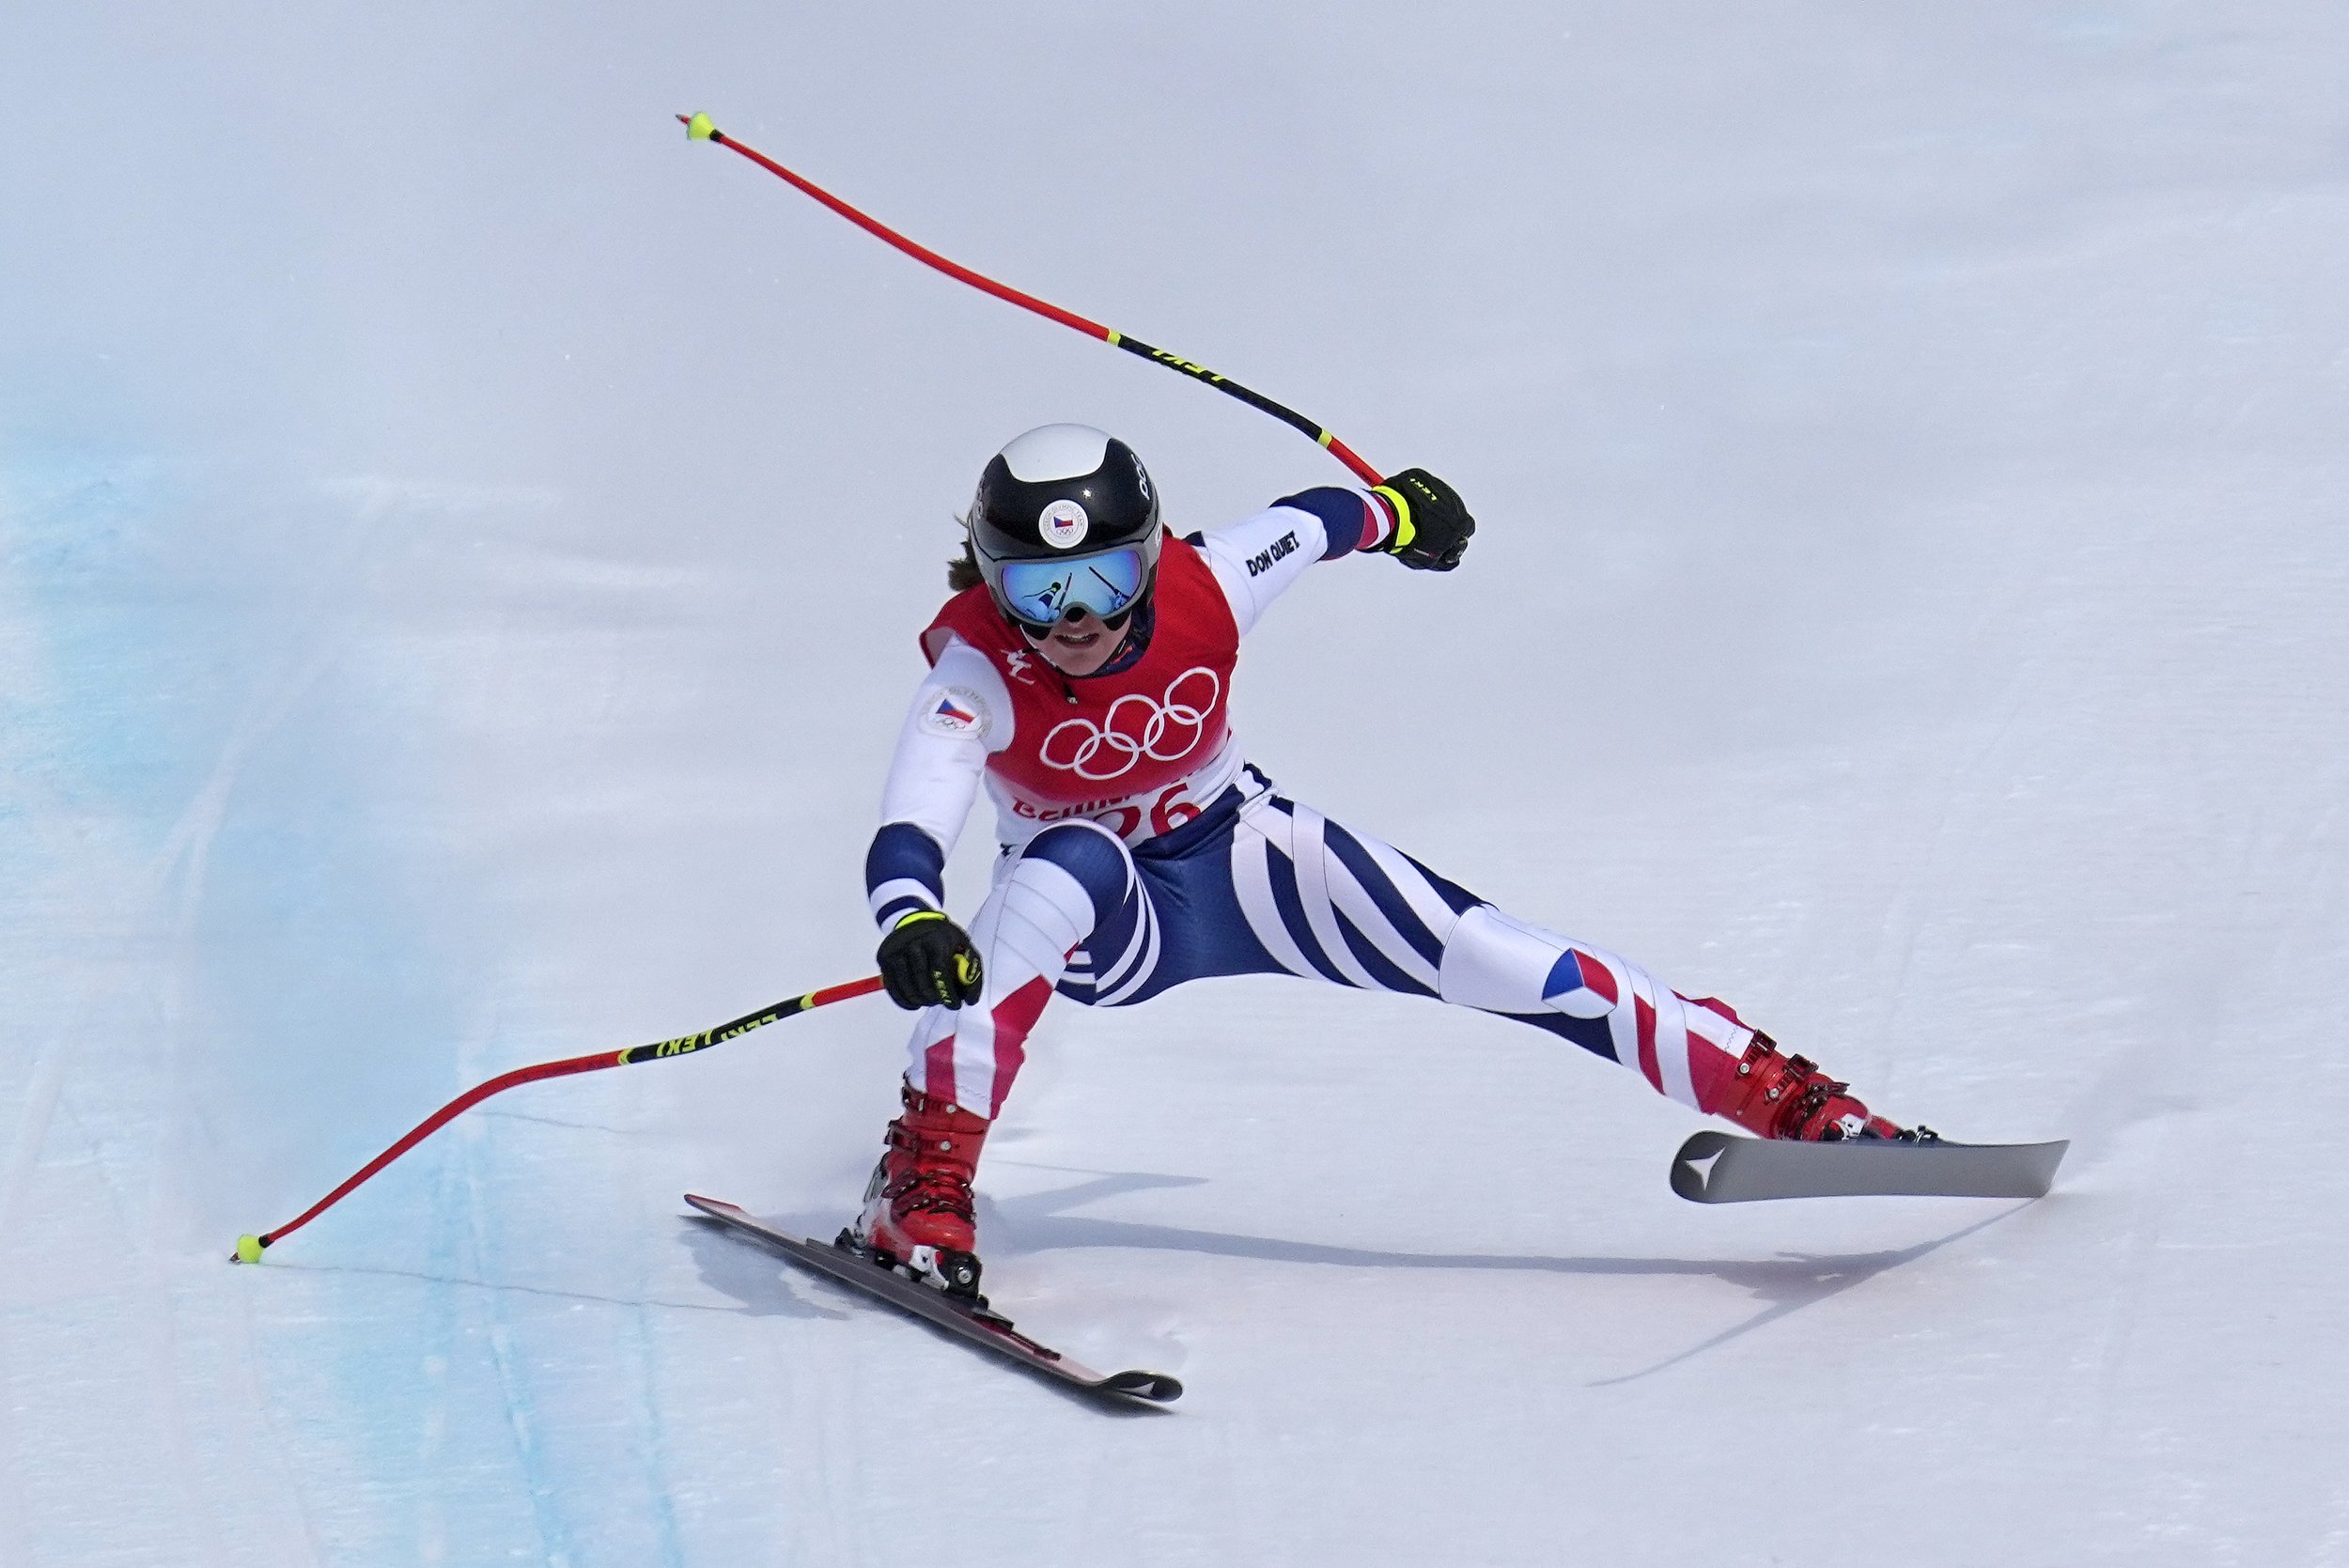  Tereza Nova of the Czech Republic struggles to maintain control during the women's combined downhill at the 2022 Winter Olympics, Thursday, Feb. 17, 2022, in the Yanqing district of Beijing. (AP Photo/Robert F. Bukaty) 